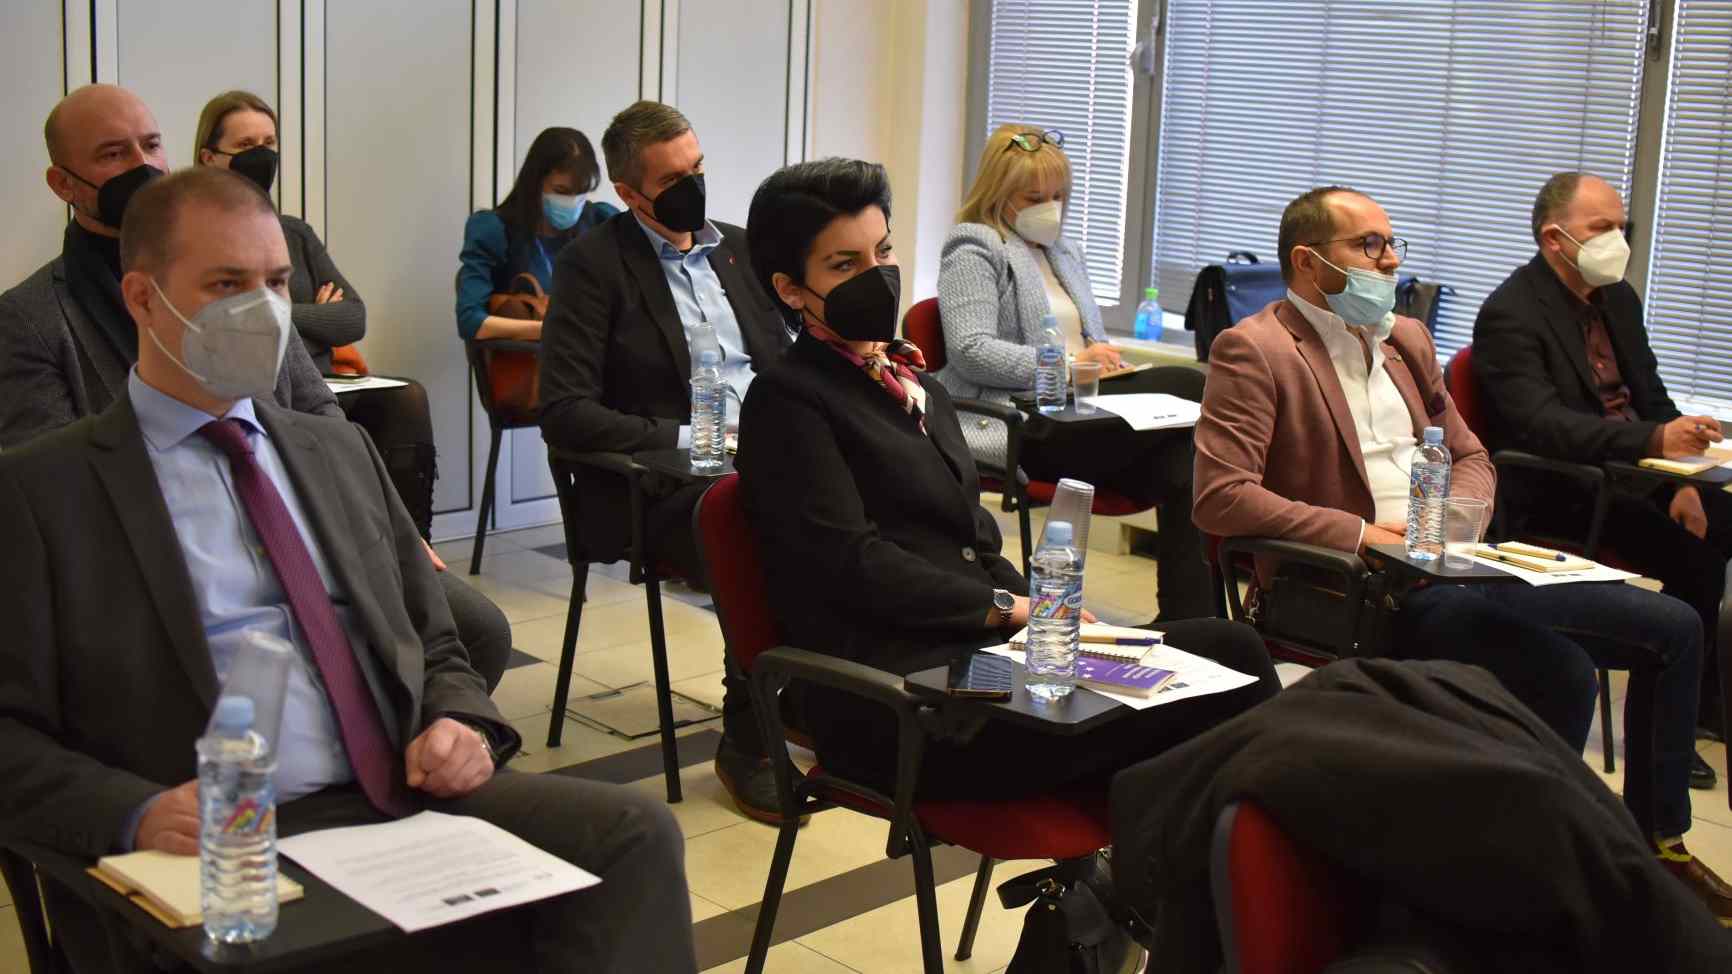 Assessing the impact of Human Rights trainings in North Macedonia on the right to liberty and security of persons